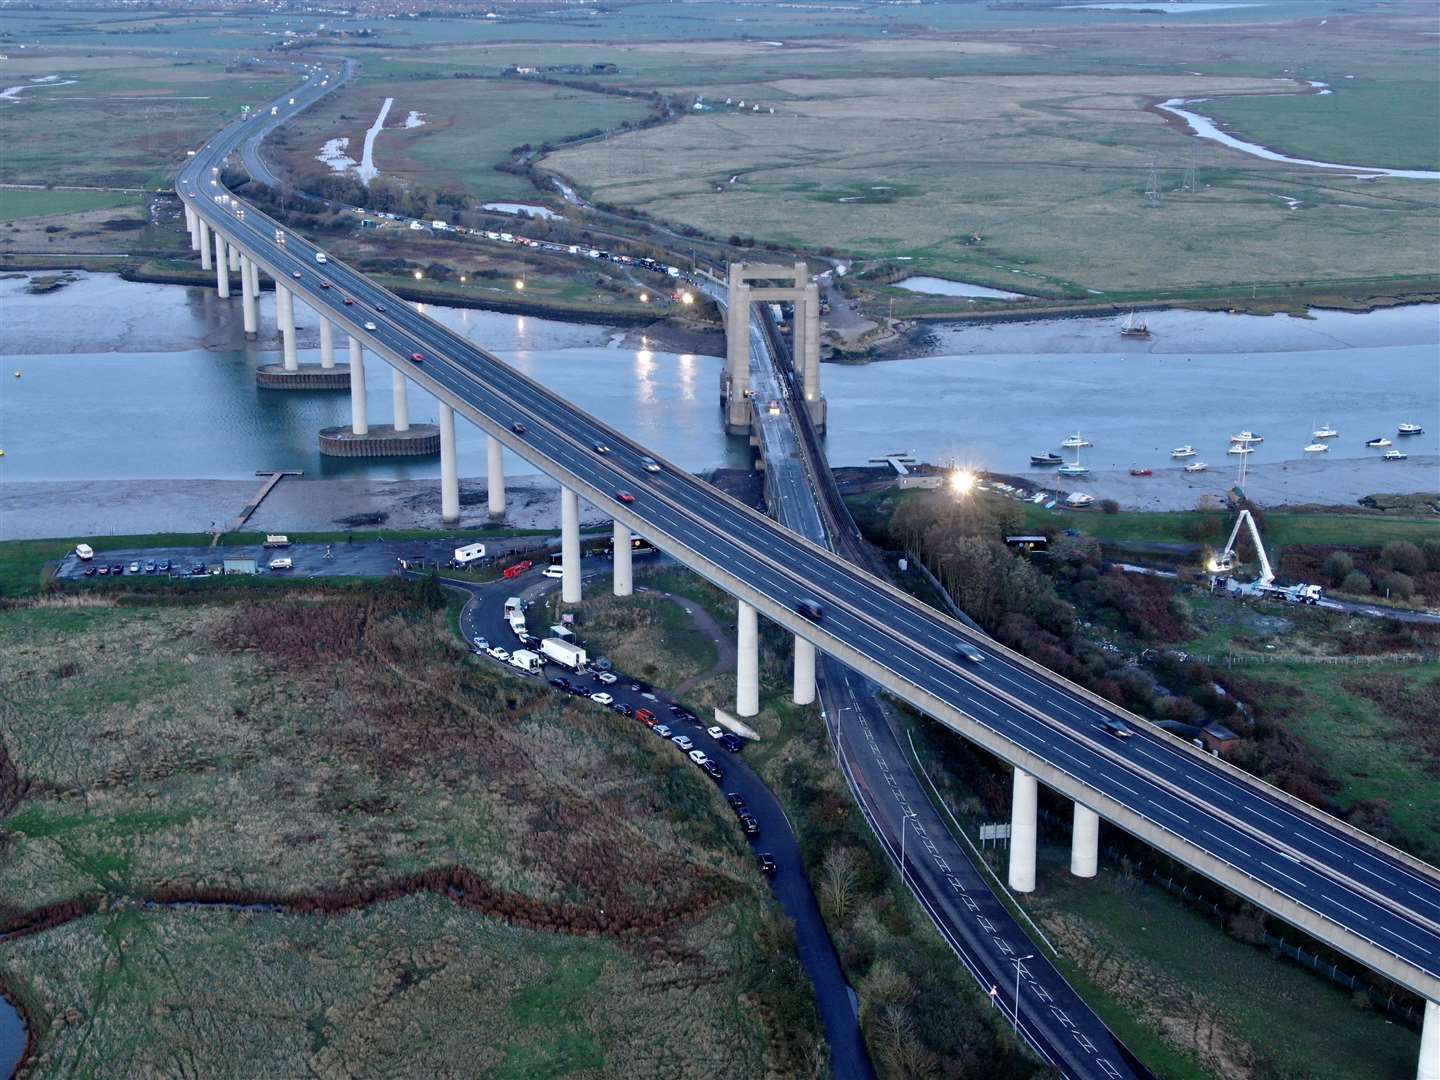 Filming of the ITV drama Too Close on the Kingsferry Bridge, Sheppey. Drone photo: Phil Drew